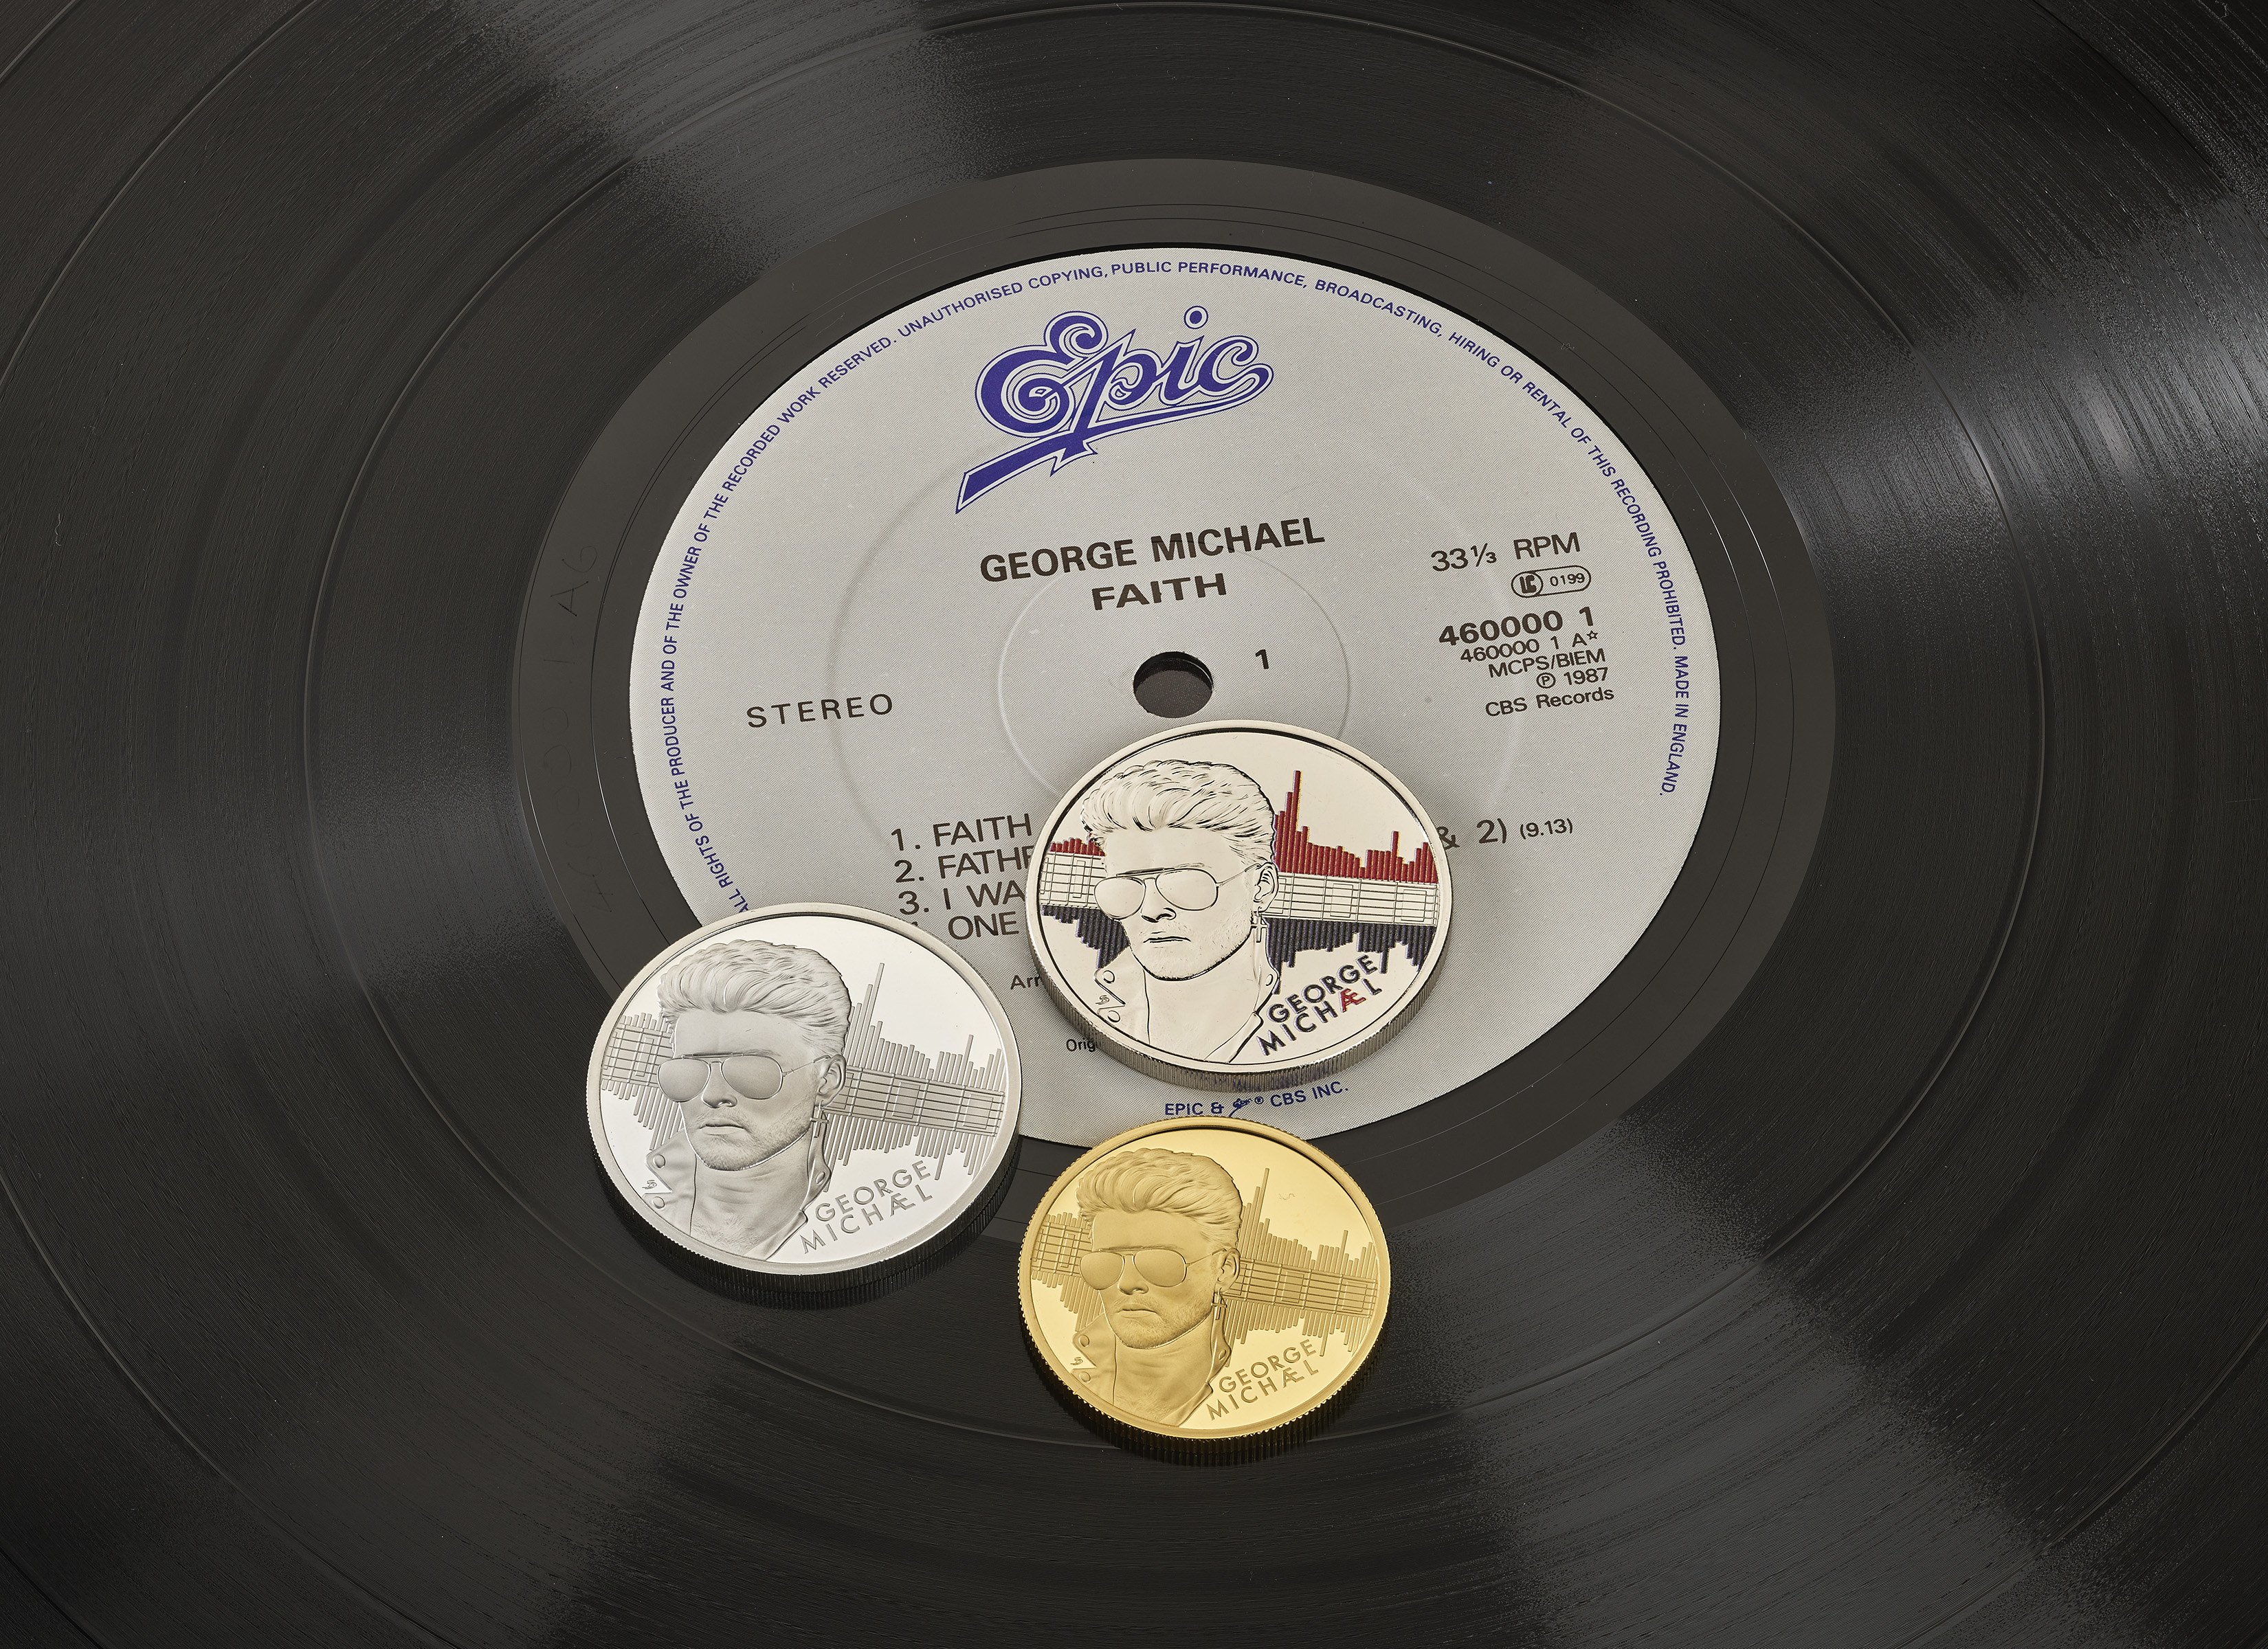 Coins on a record